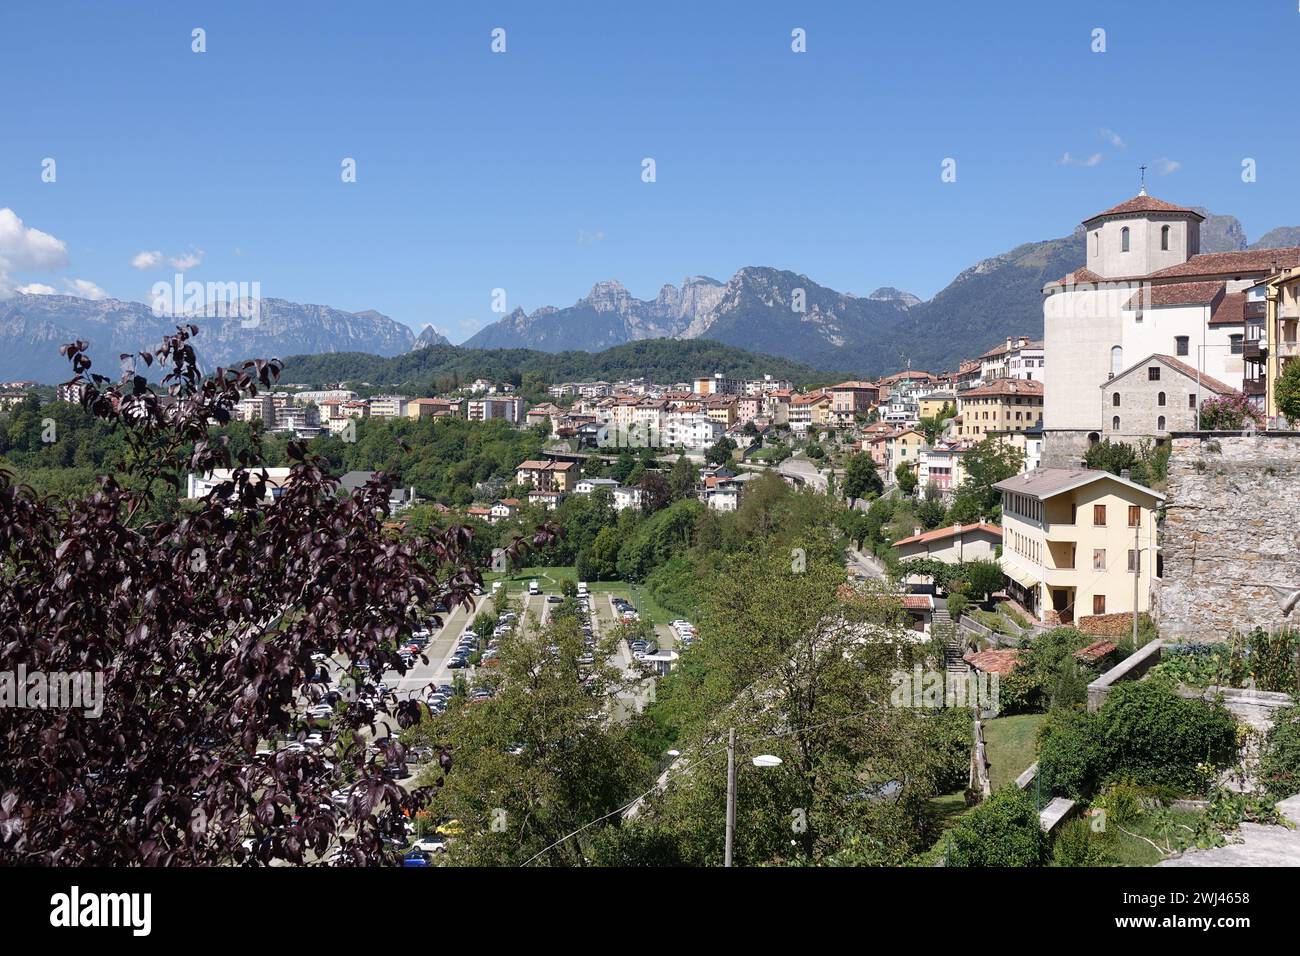 Old town of Belluno Stock Photo